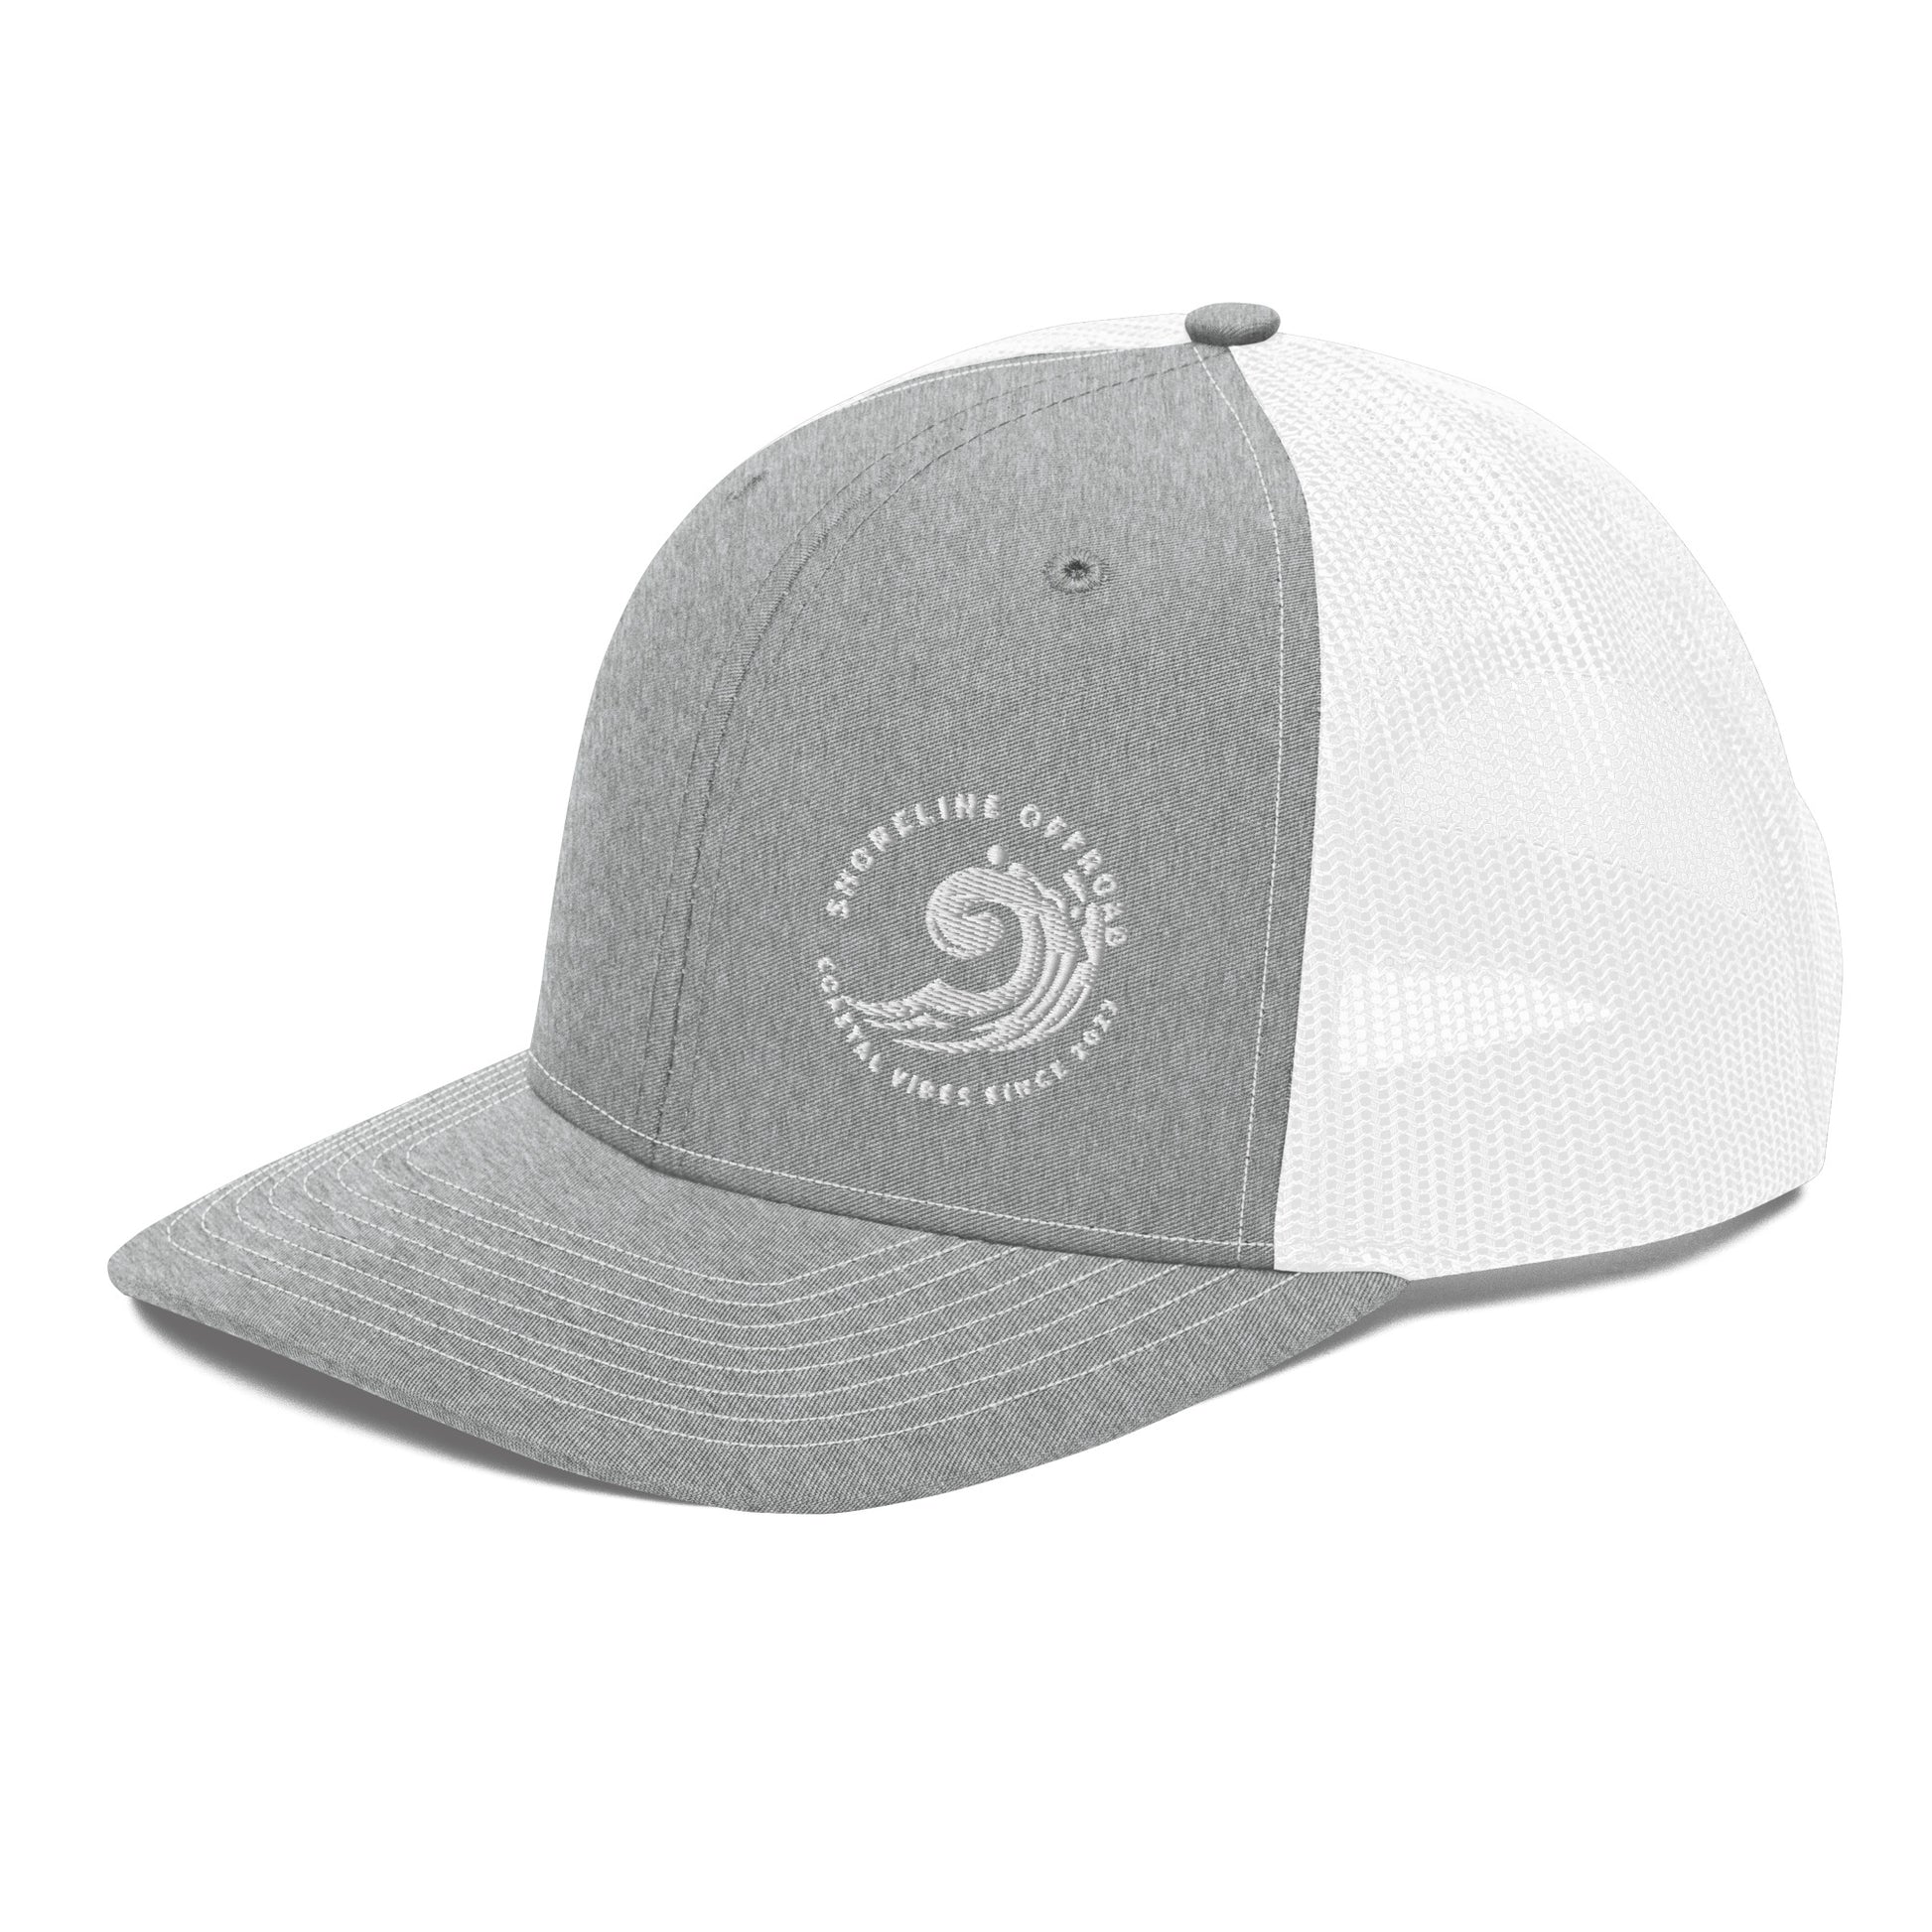 a grey and white hat with a white logo